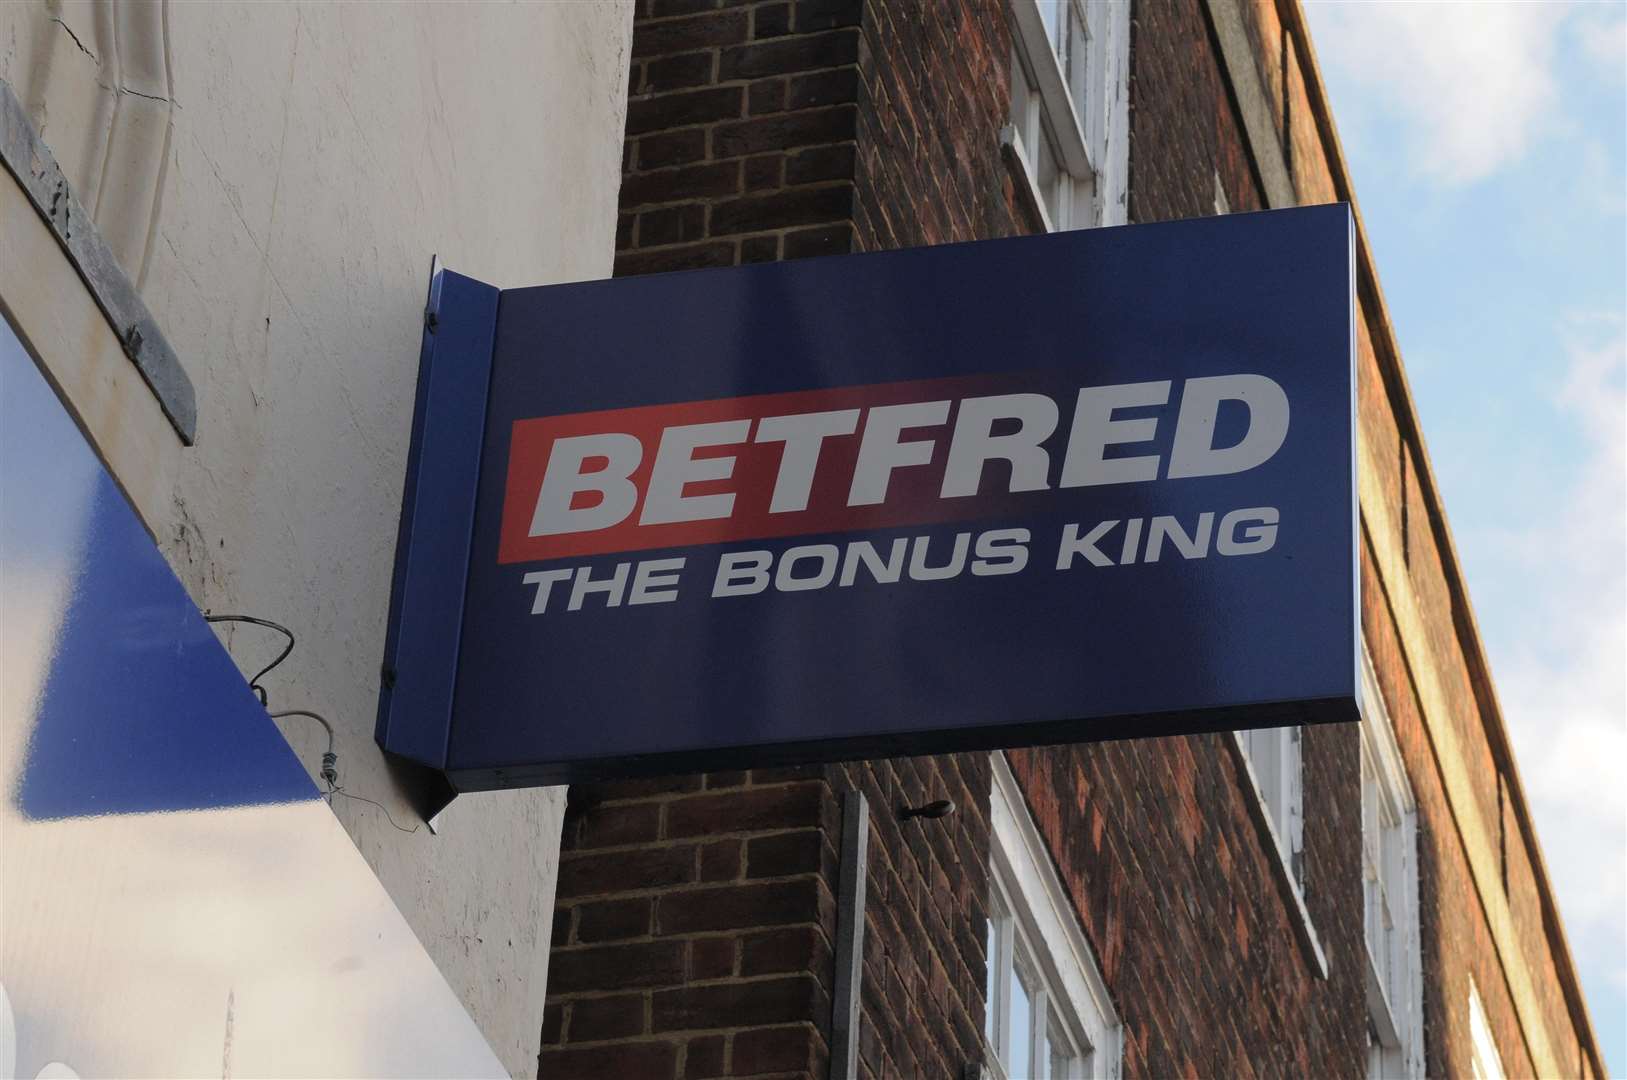 Alan's punt with Betfred paid off